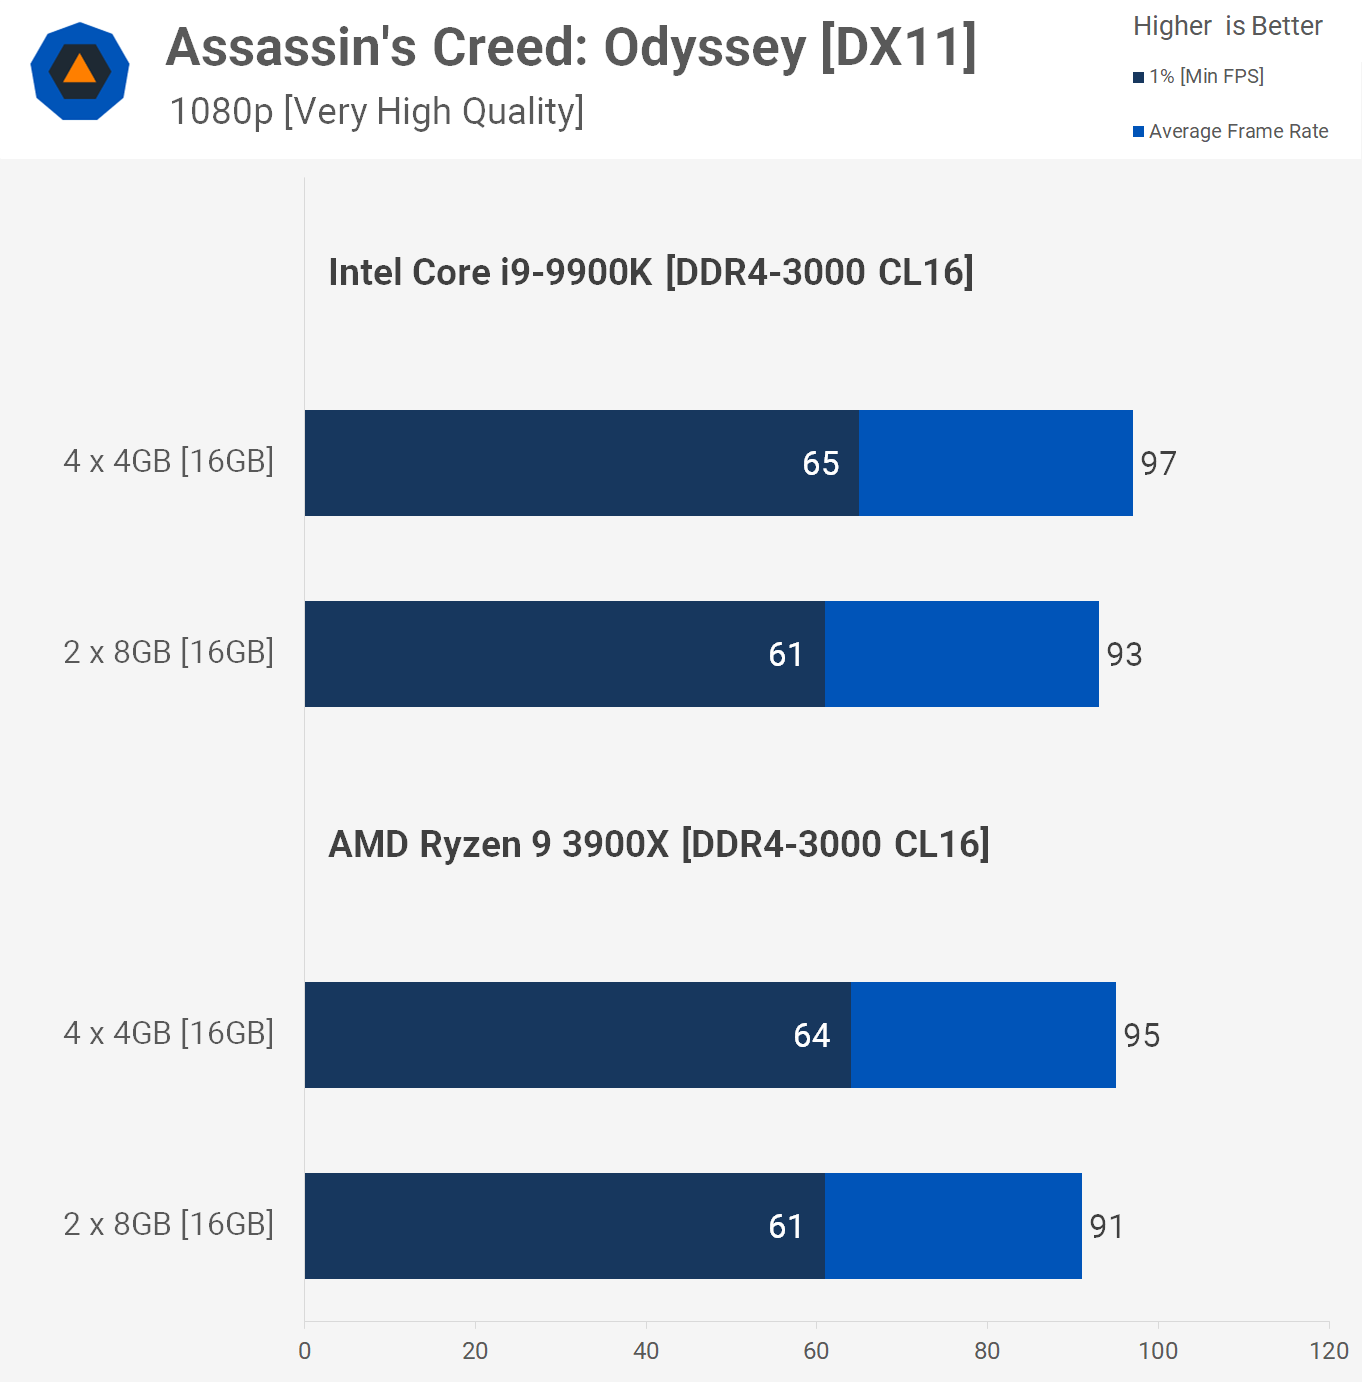 Variant celestial dead Are More RAM Modules Better for Gaming? 4 x 4GB vs. 2 x 8GB | TechSpot